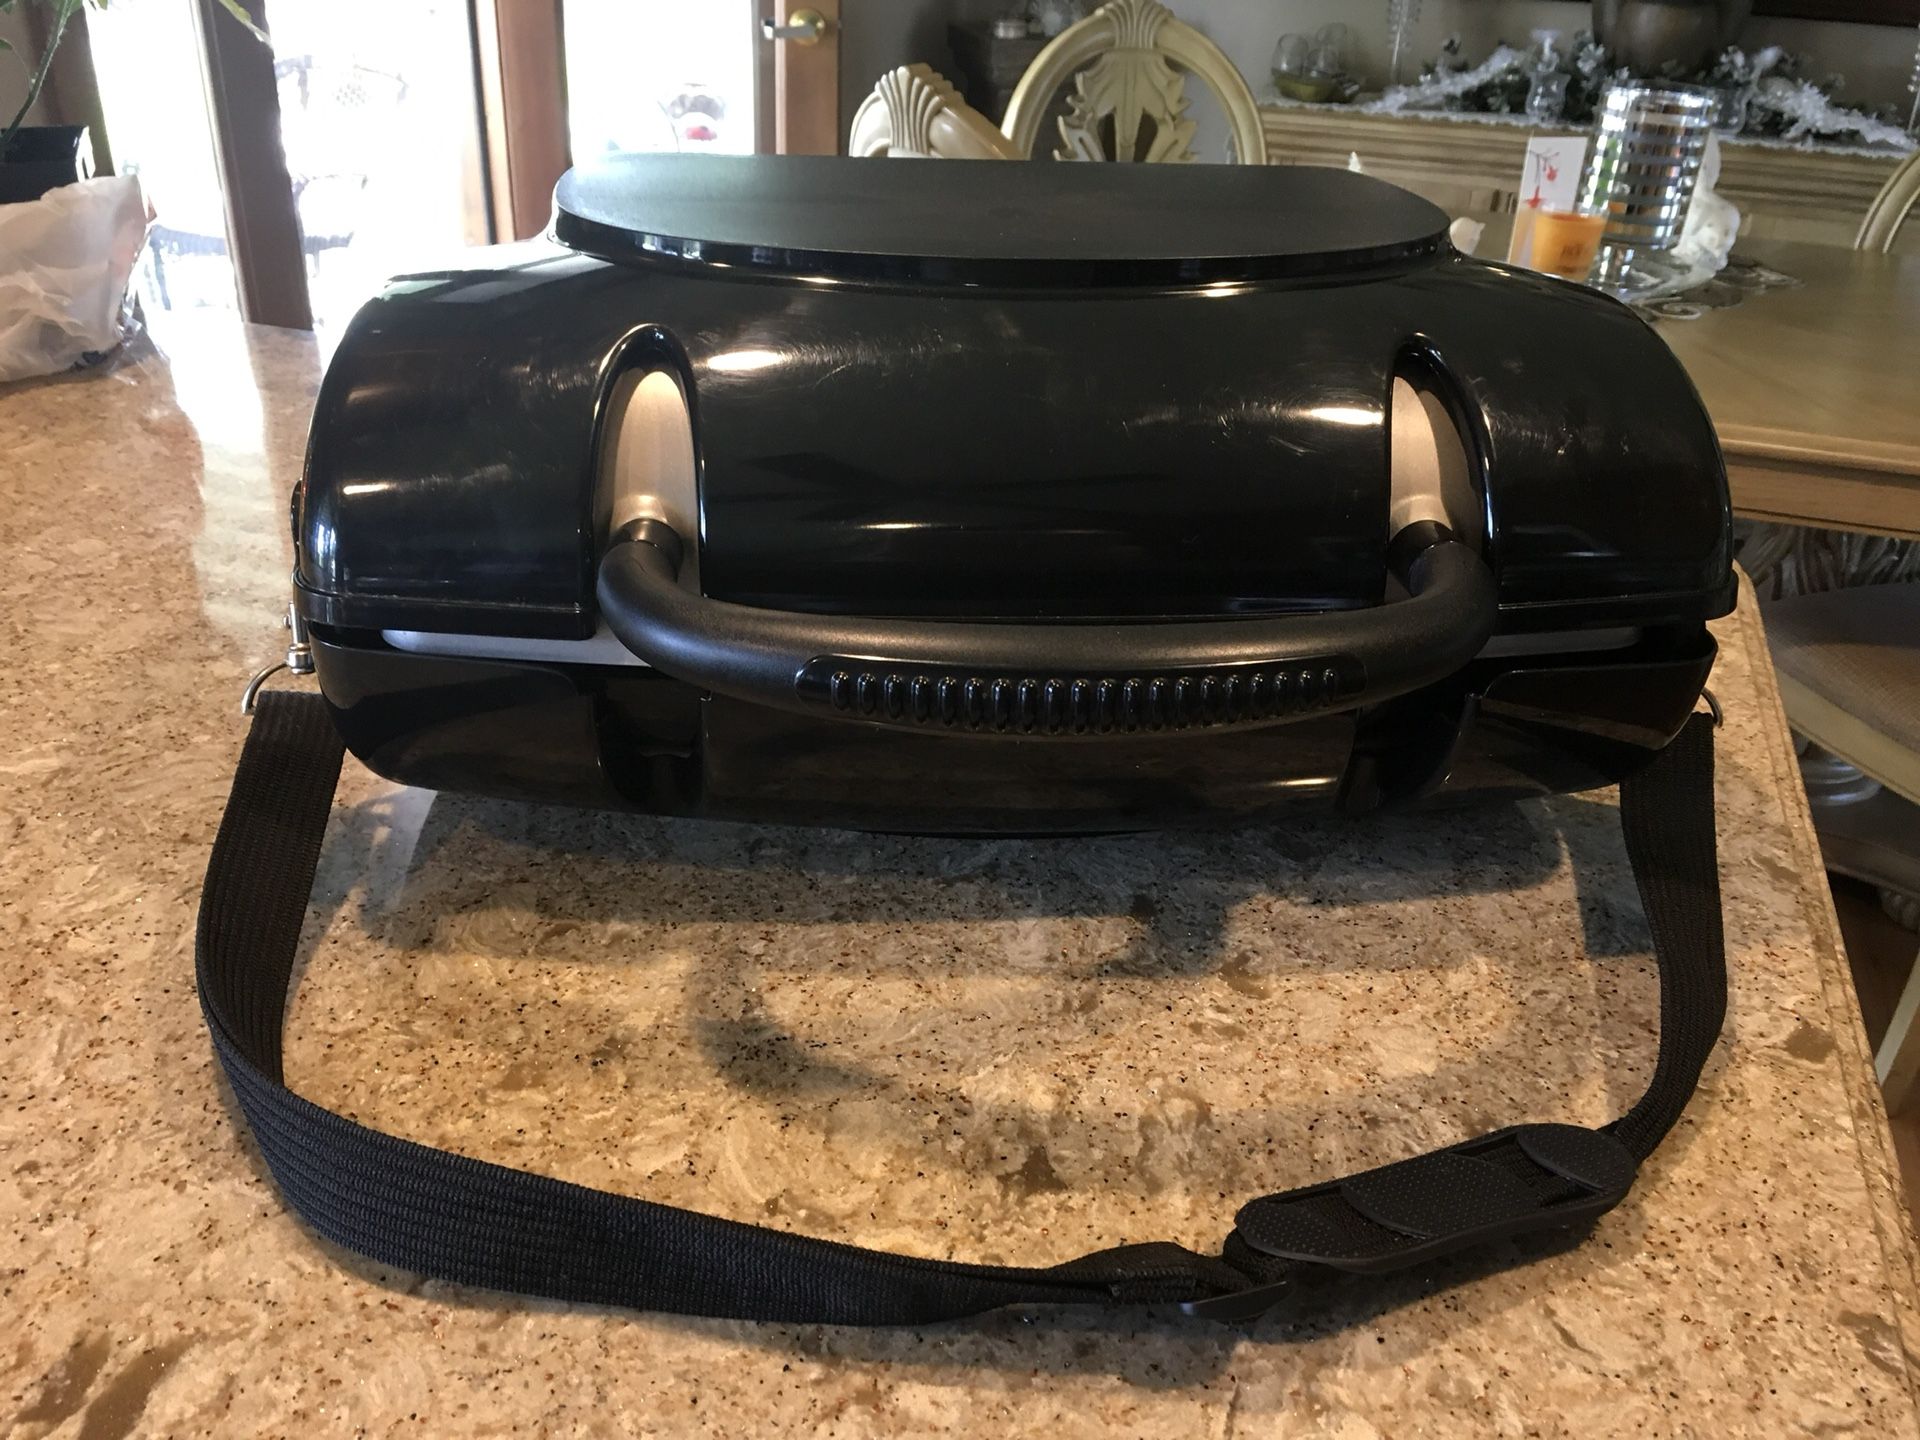 George Foreman portable gas grill. Great for camping or just on your patio. Comes with carrying case.